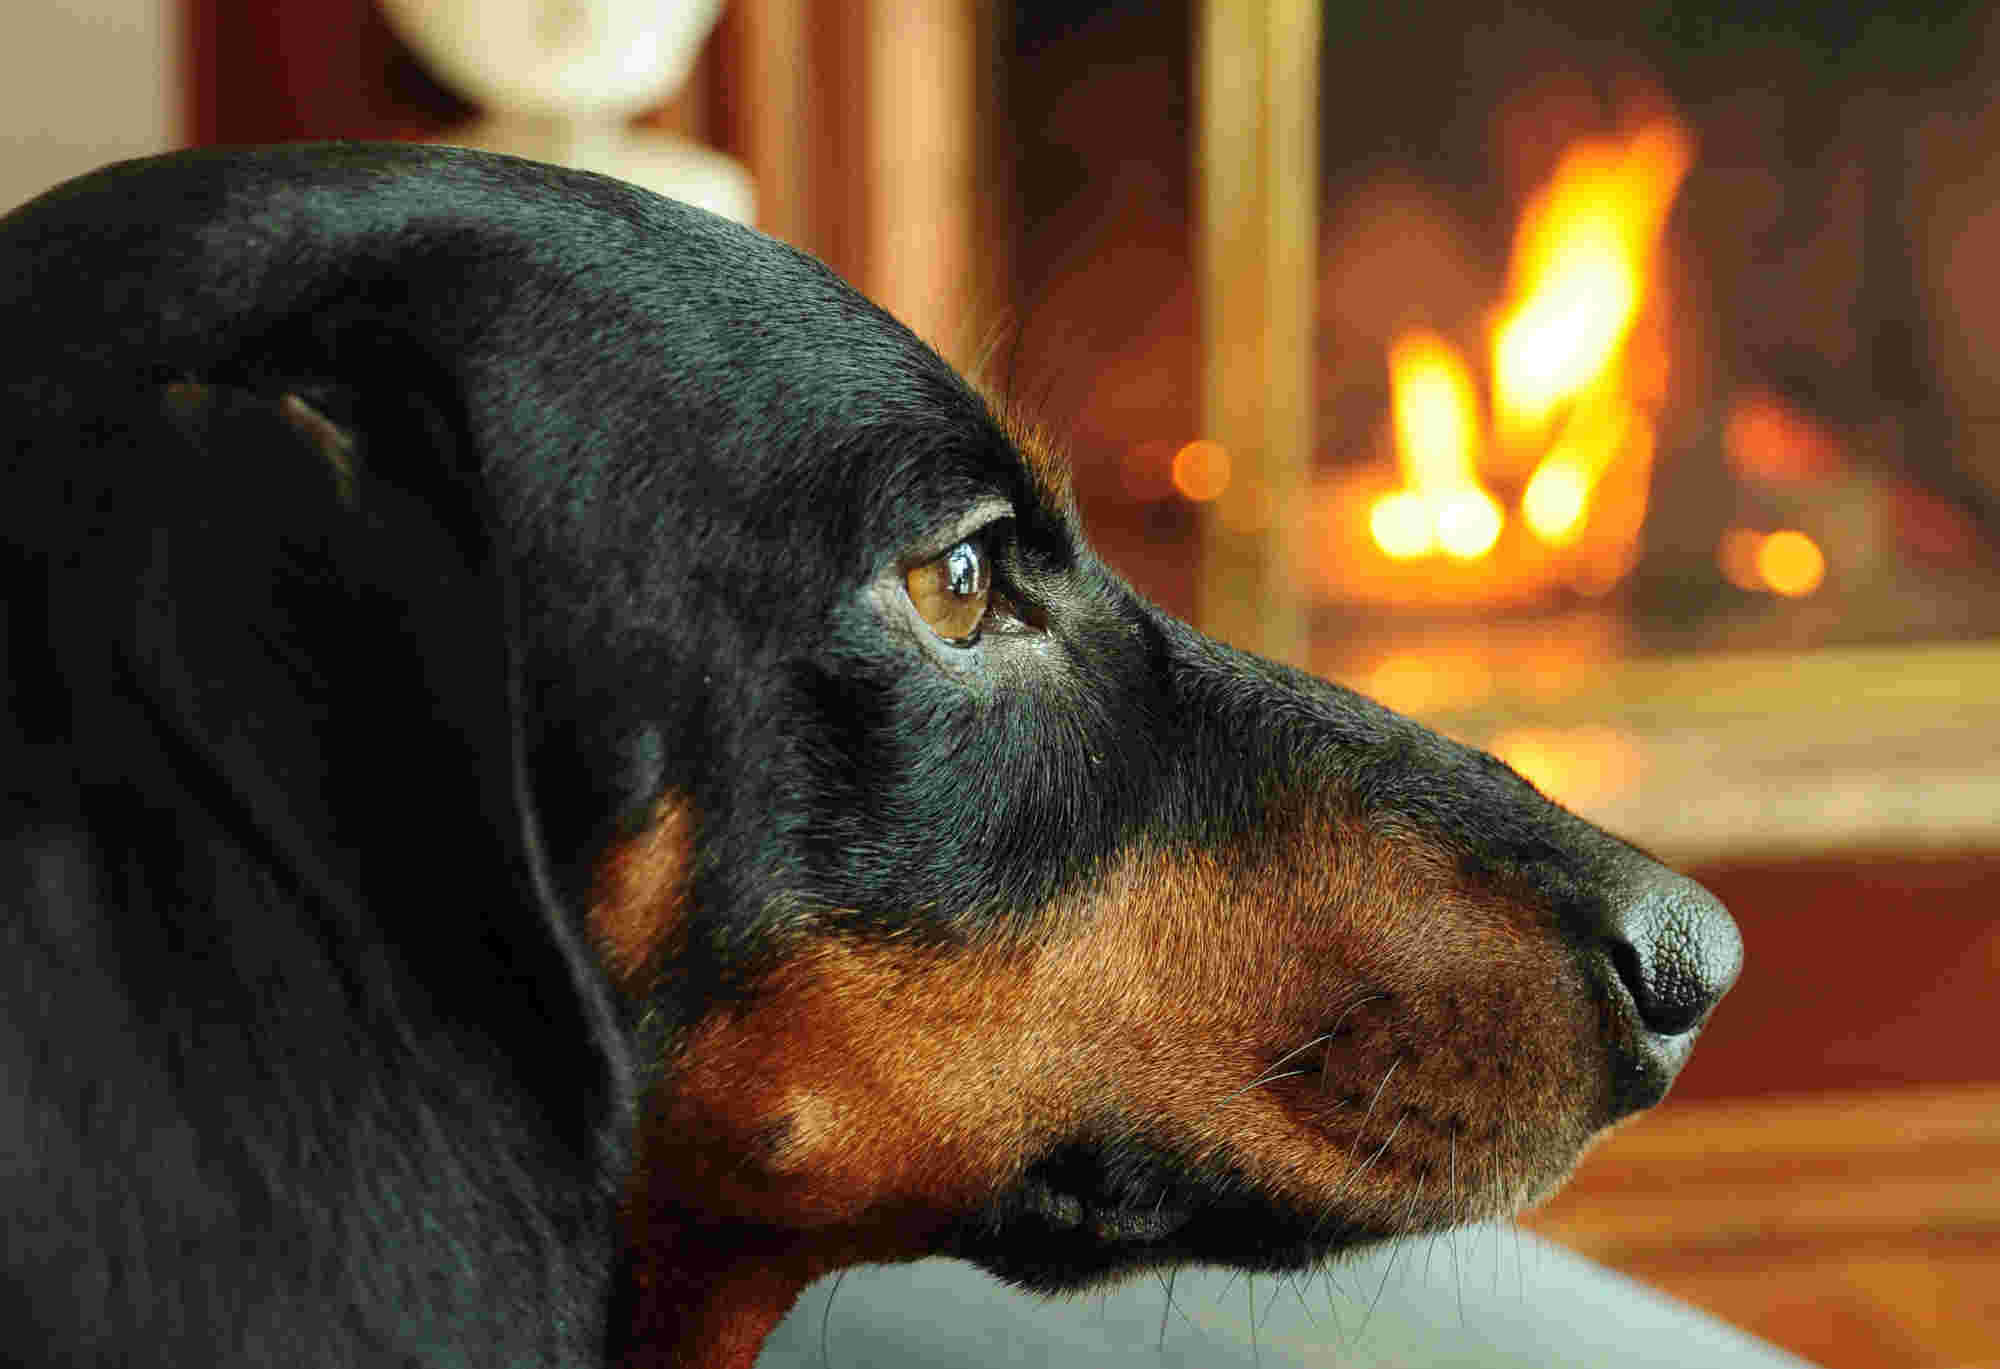 Dachshund with fireplace in background